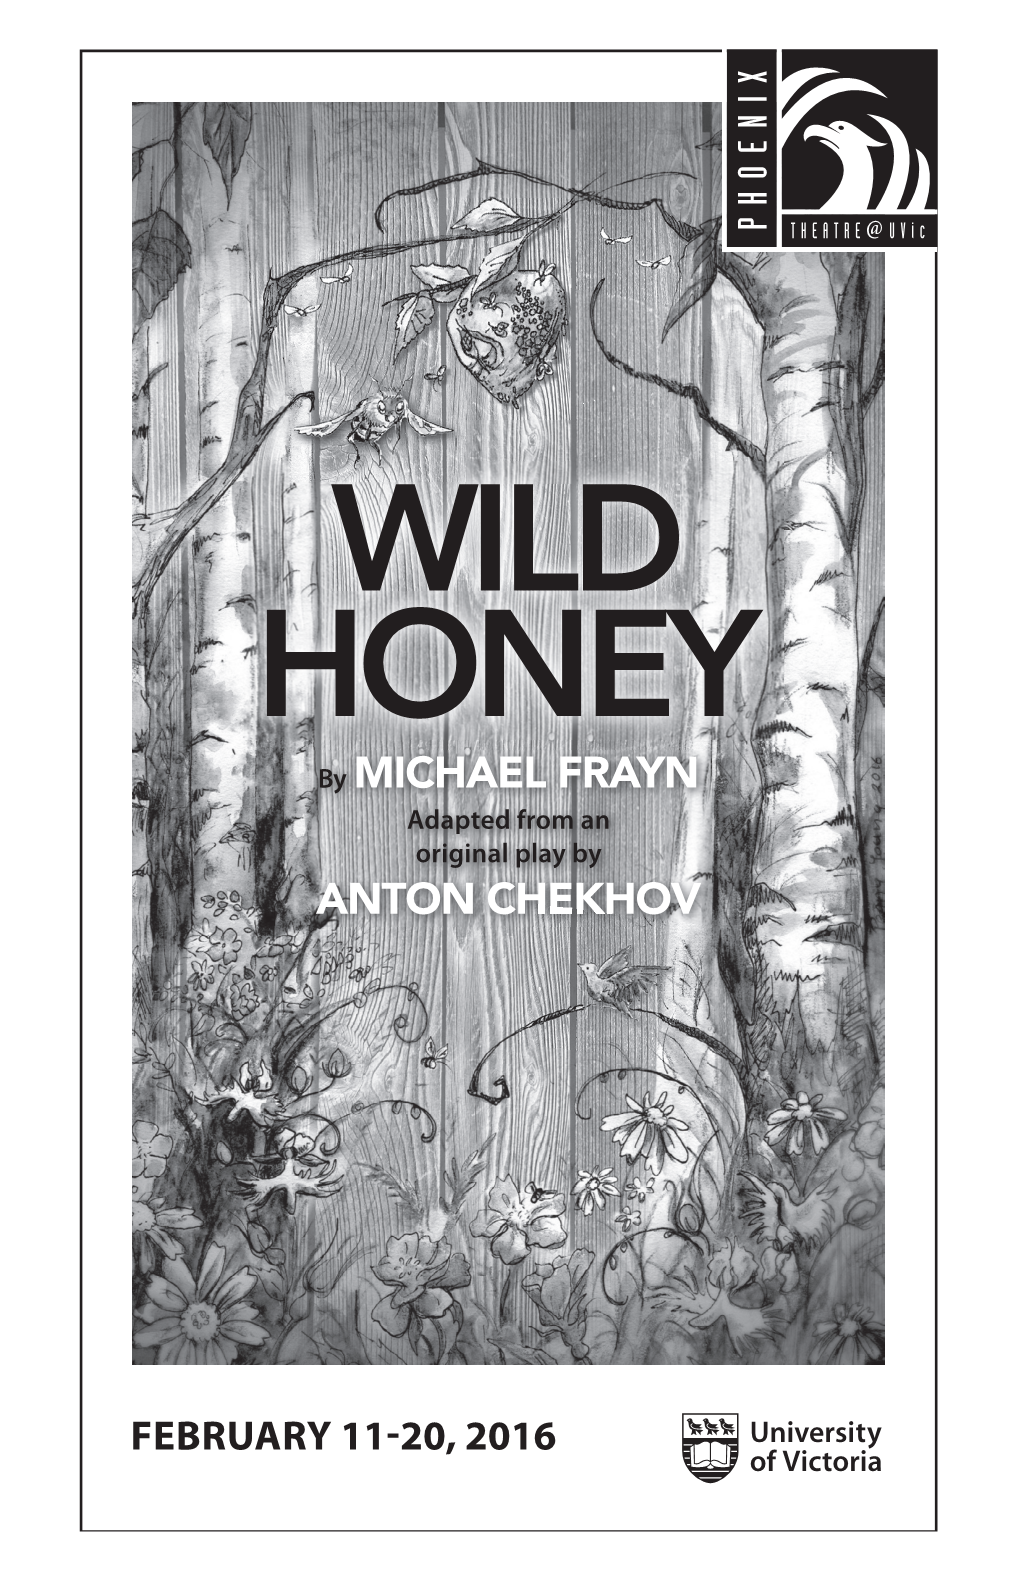 WILD HONEY by MICHAEL FRAYN Adapted from an Original Play by ANTON CHEKHOV